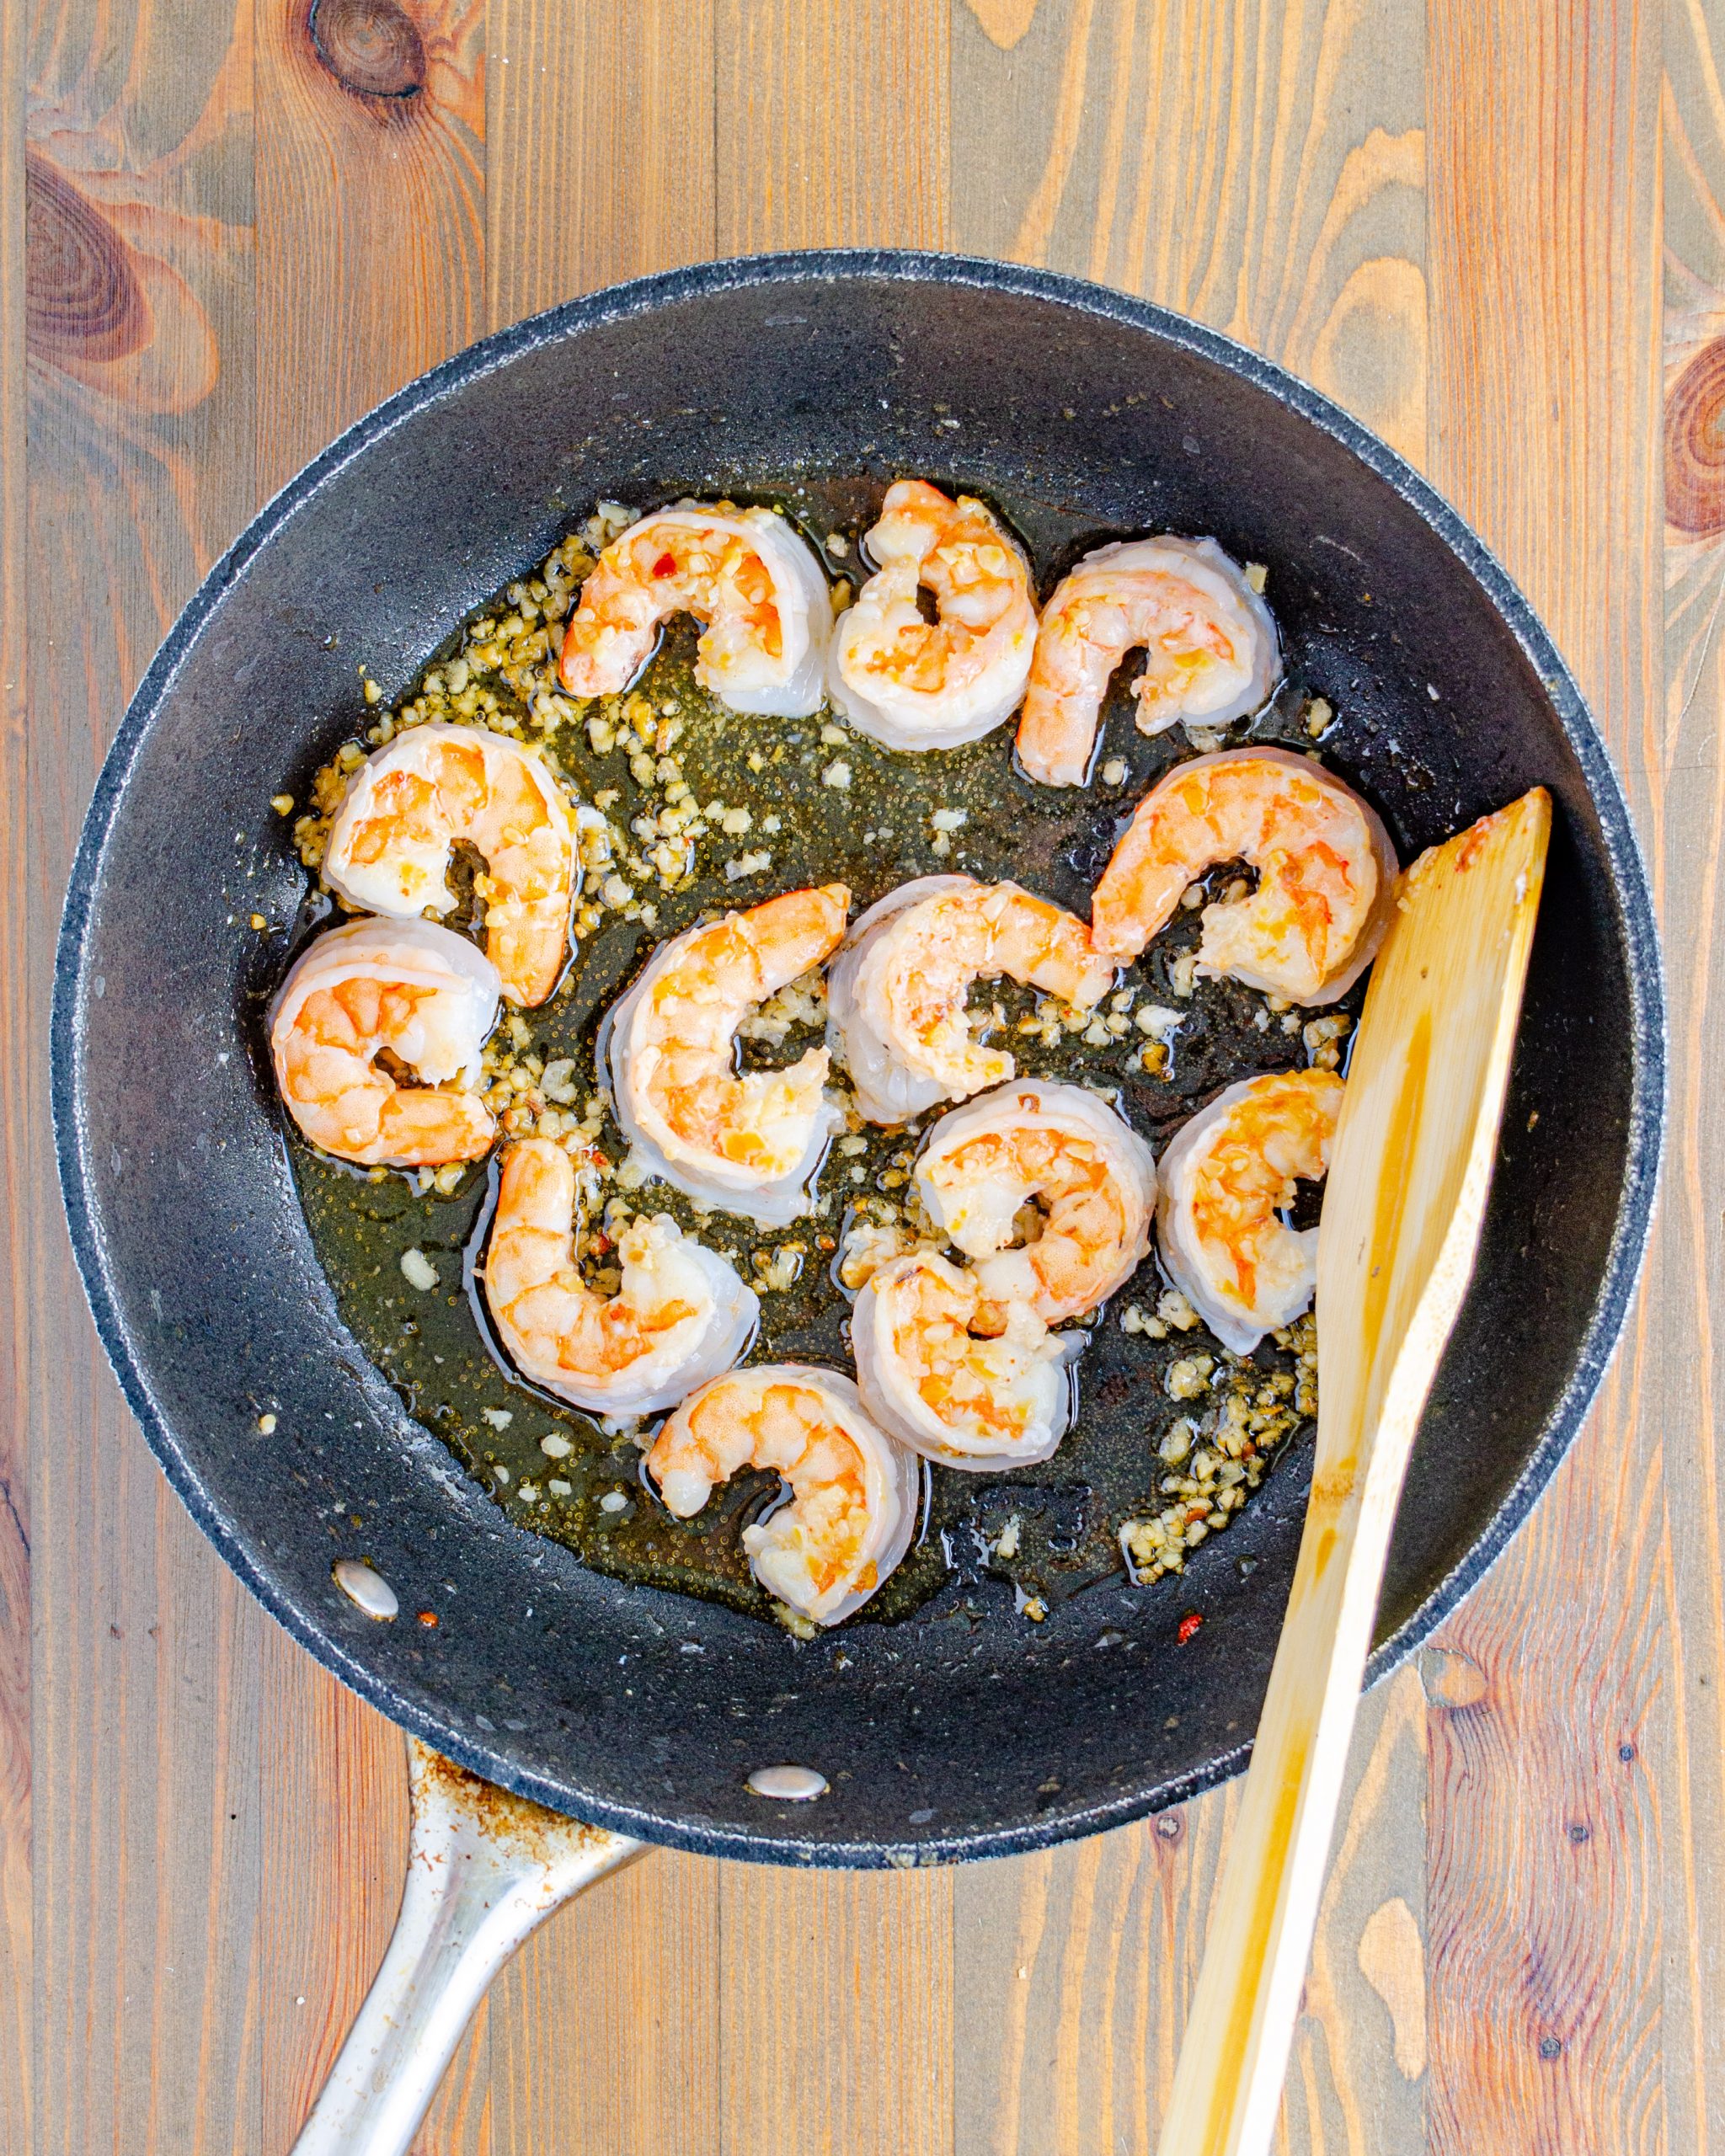 Place the shrimp into the skillet along with ¼ tsp salt and saute until the shrimp are cooked through. Remove and set aside.